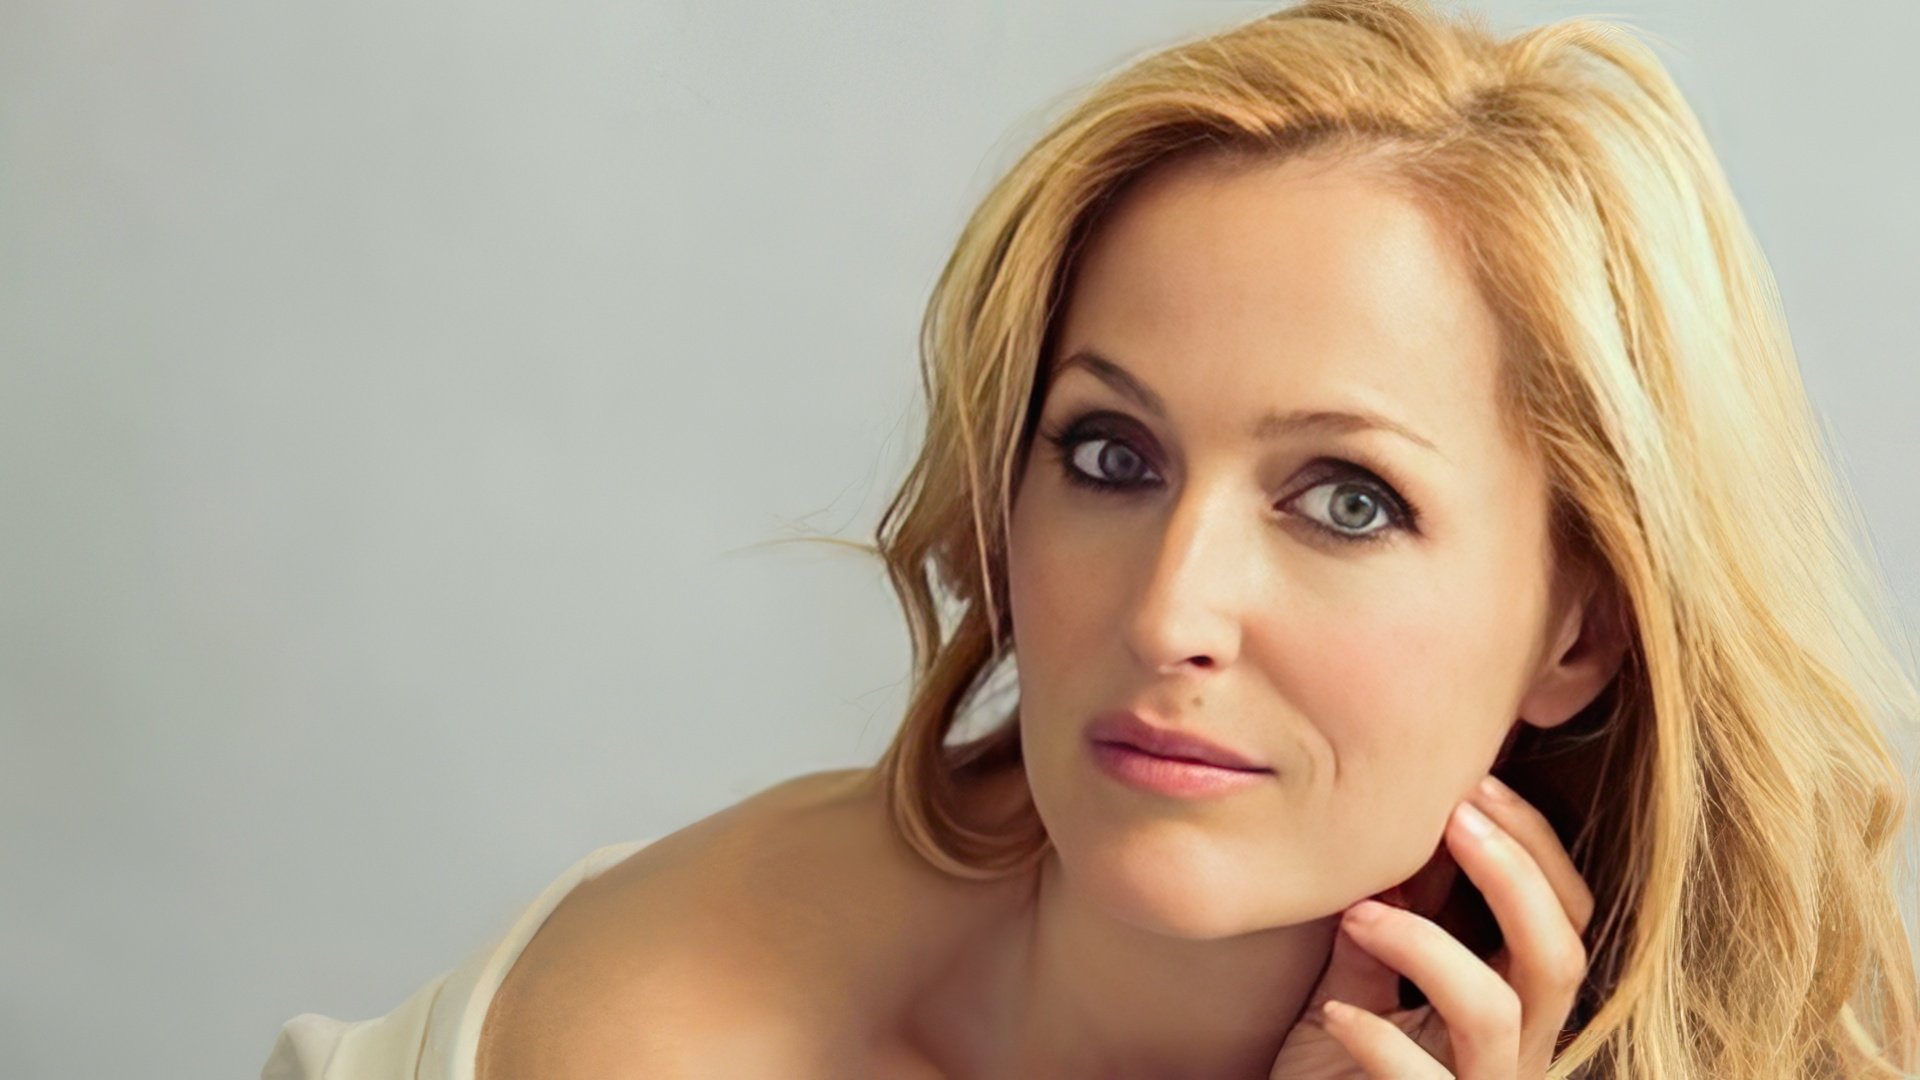 Gillian Anderson dyed her hair blonde